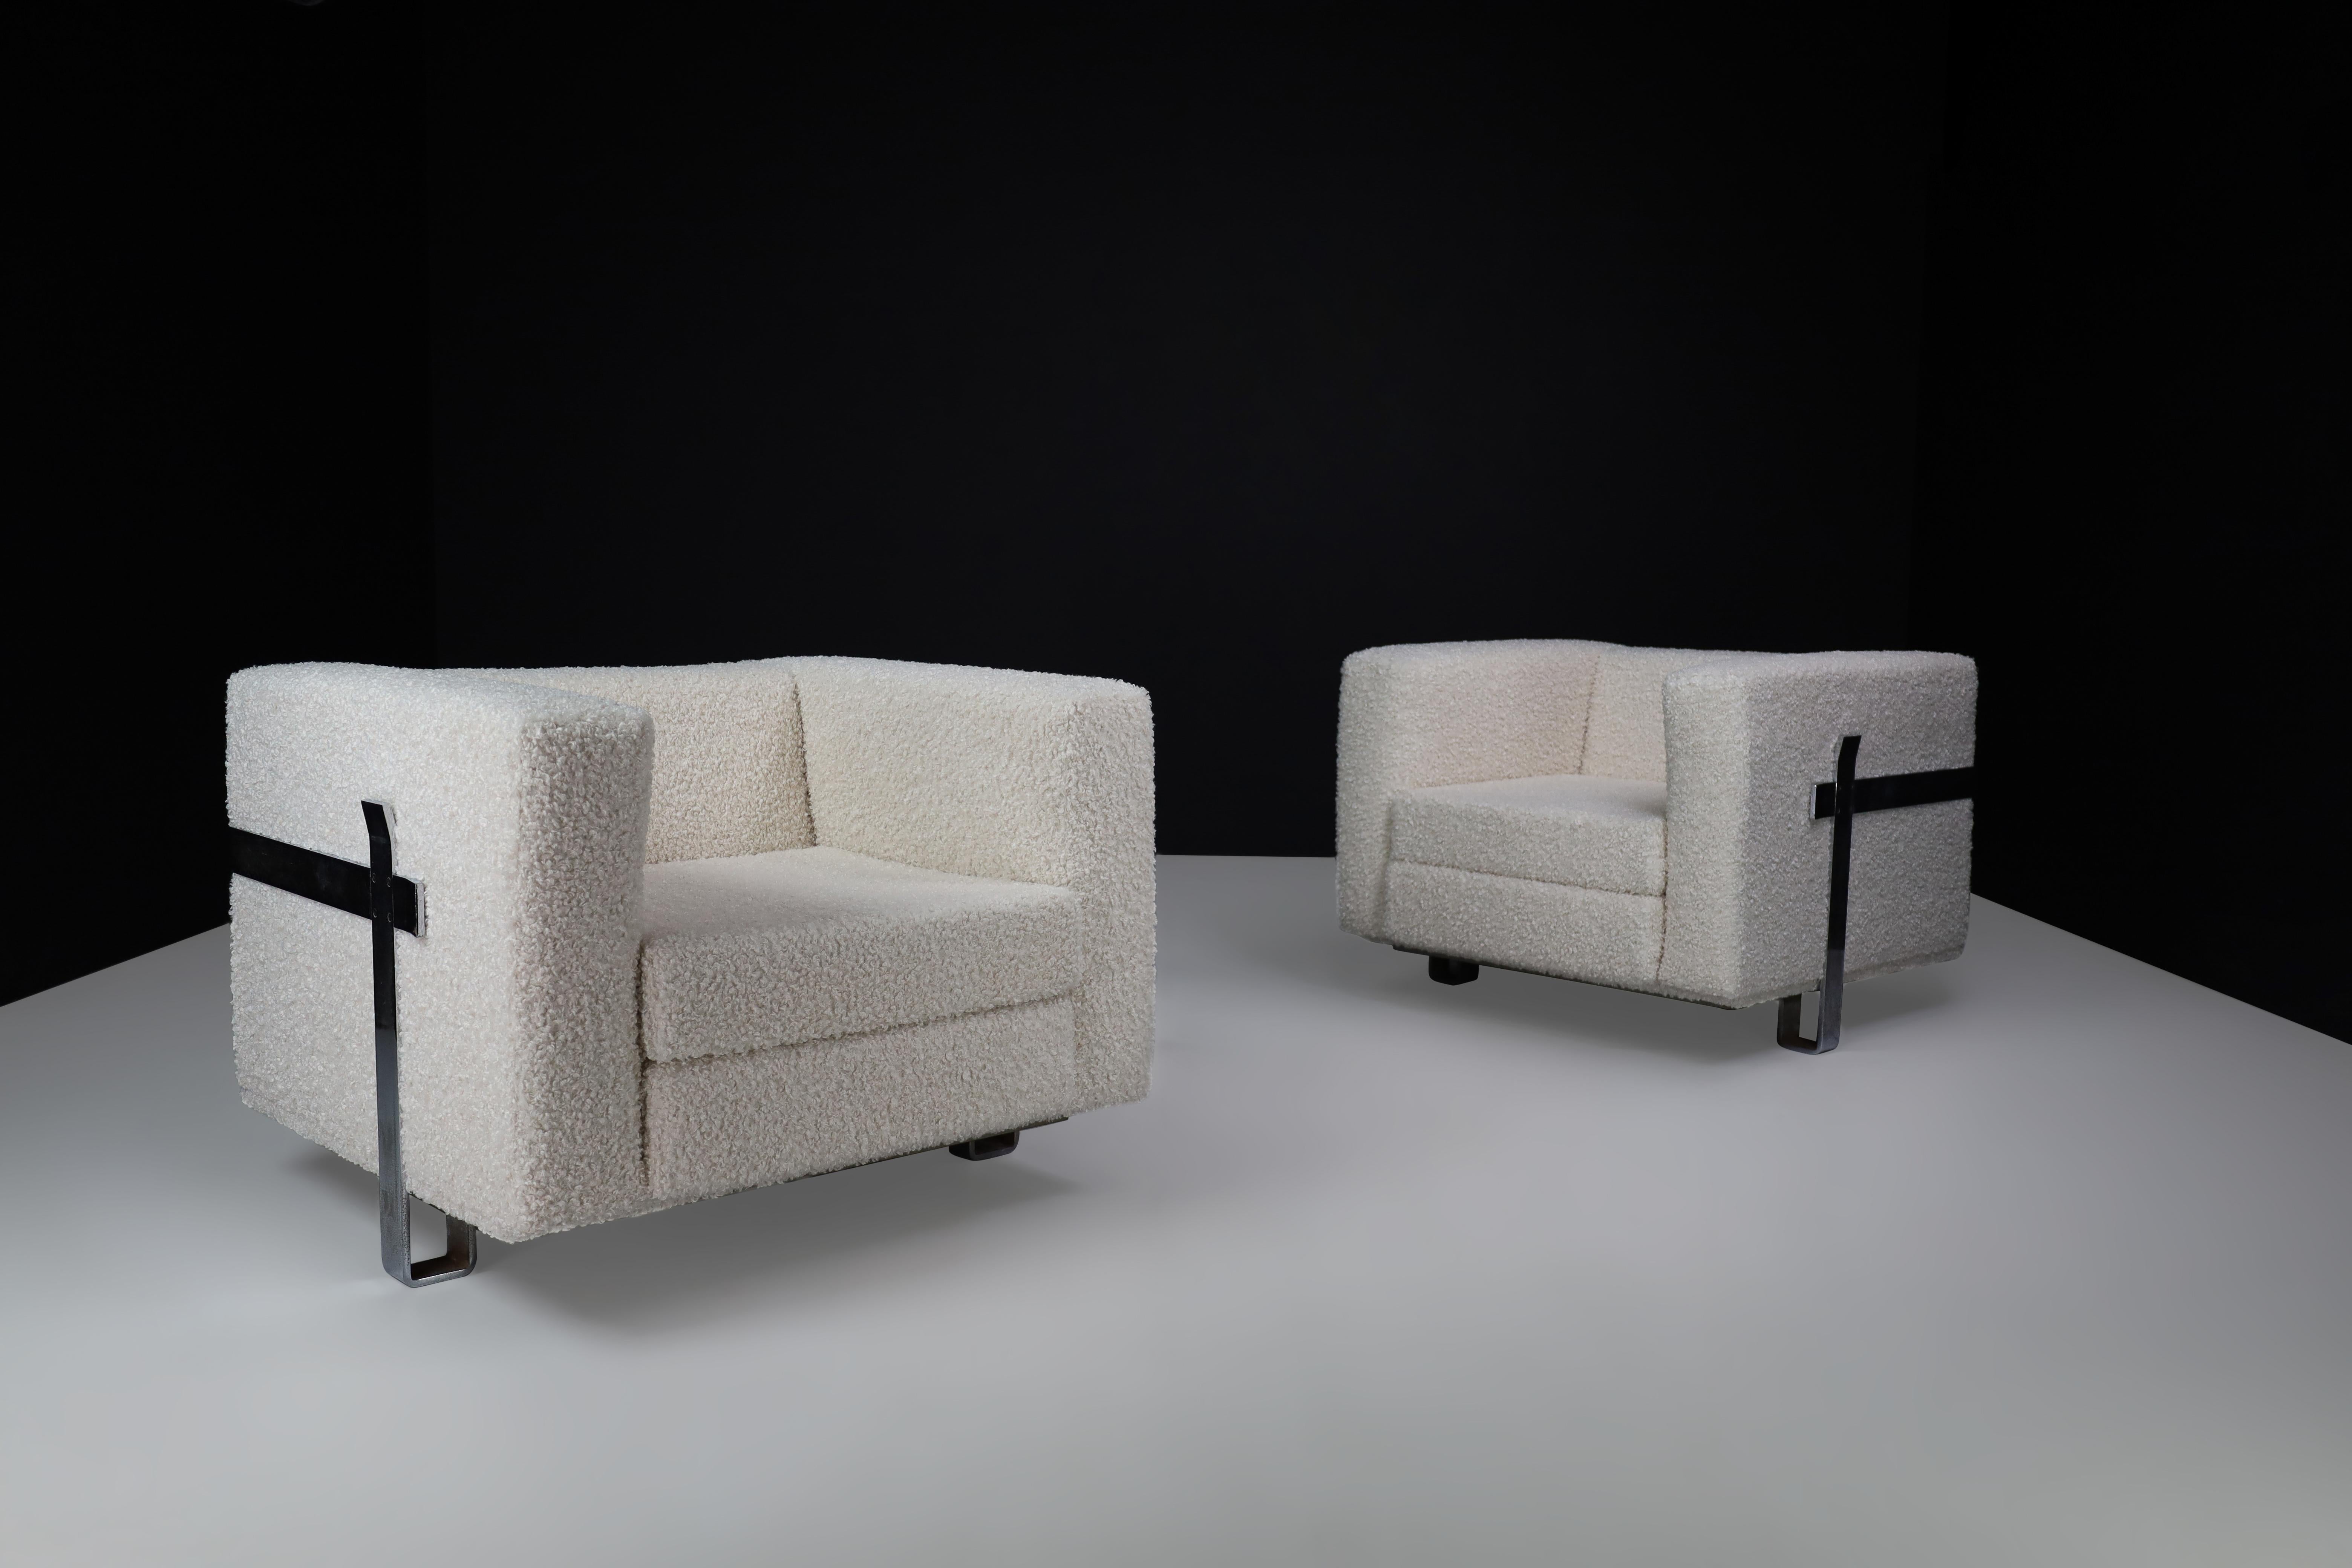 Midcentury Bouclé Lounge Chairs Designed by Luigi Caccia Dominioni for Azucena, Italy, 1950s.

These midcentury lounge chairs, created by Luigi Caccia Dominioni for Azucena in Italy during the 1950s, are a beautiful addition to any space.